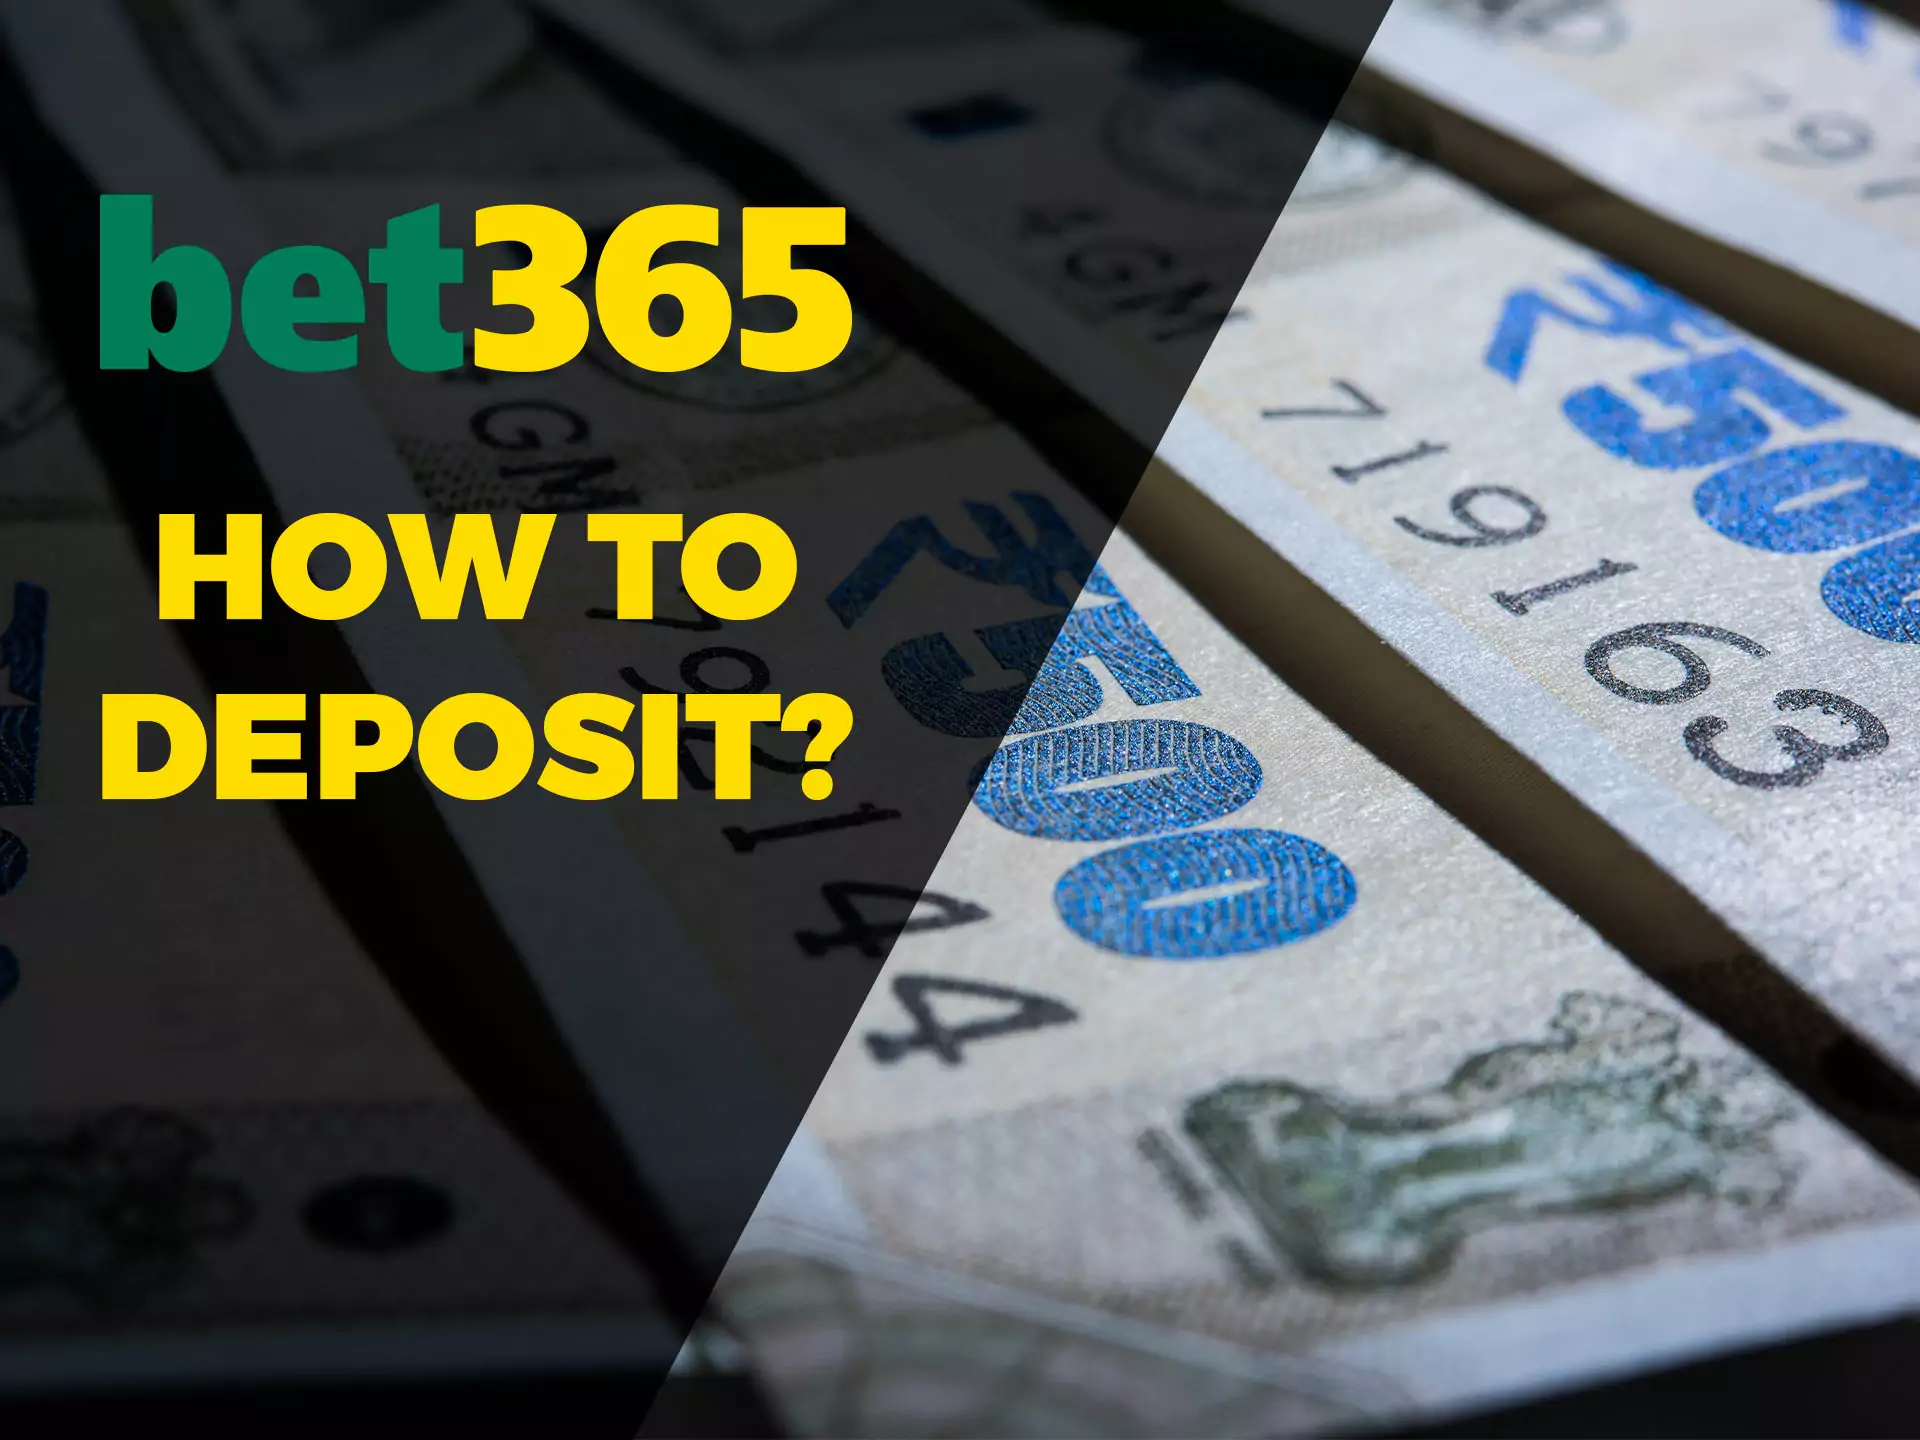 You can make deposit in rupees at Bet365.